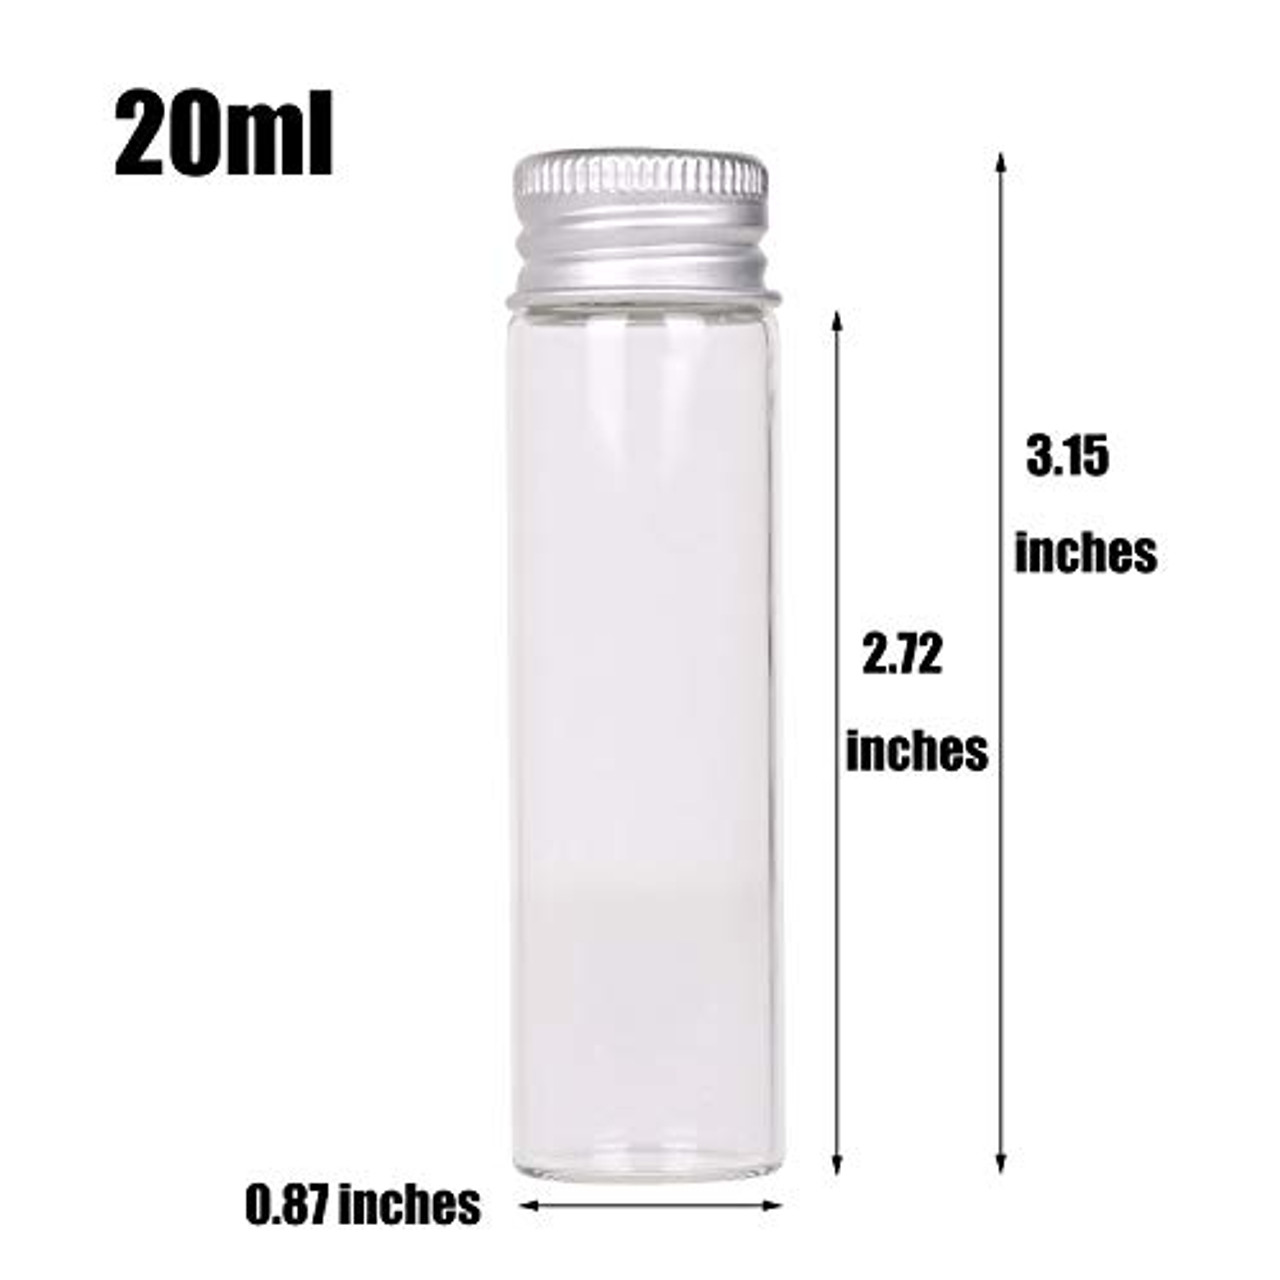  MaxMau 100 Sets Small Glass Bottles with Aluminum Cap